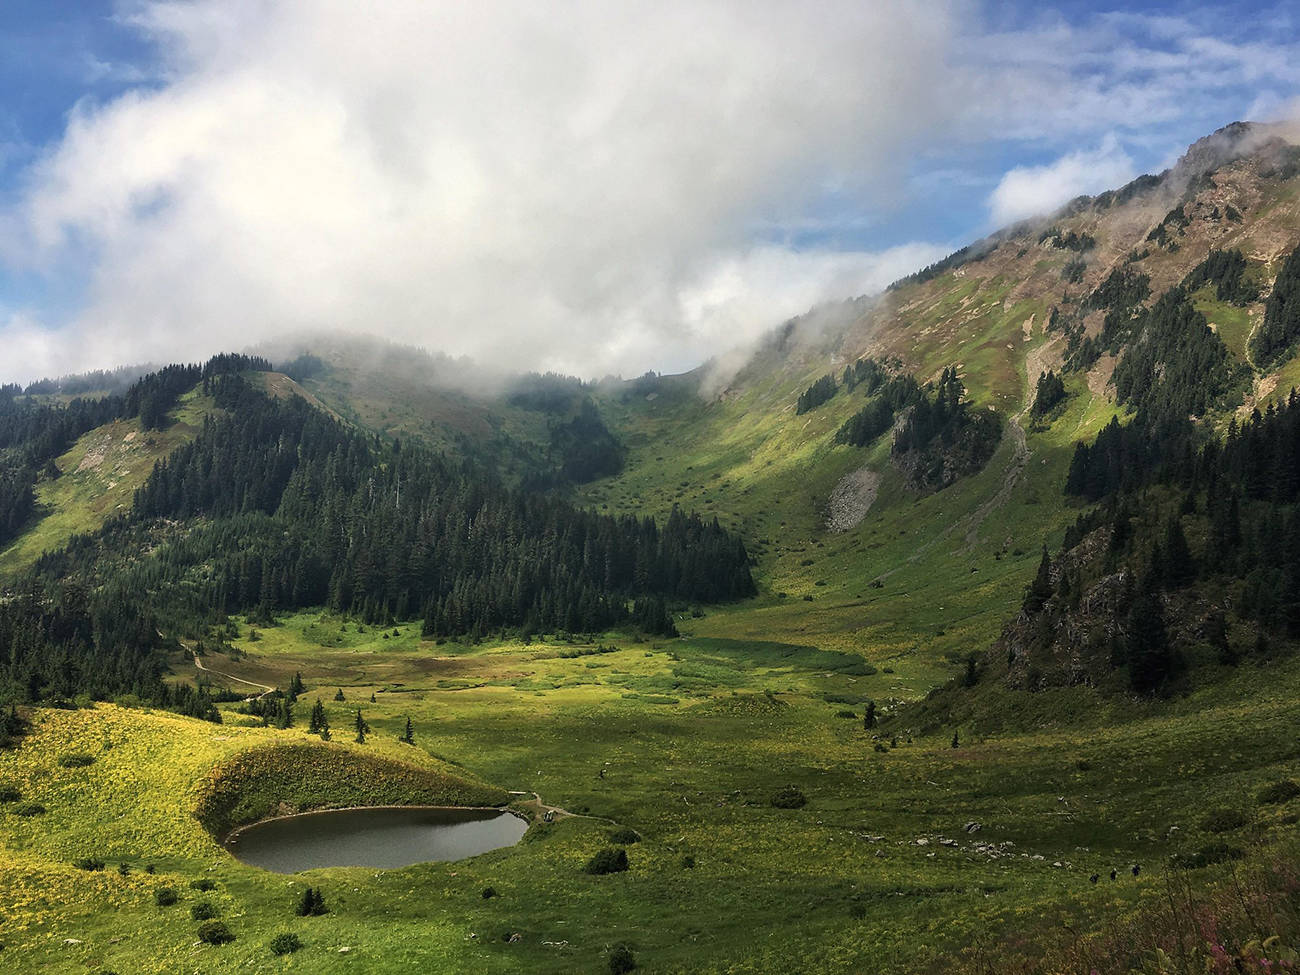 Youll need a vehicle with 4x4 to make it to the Mt. Cheam trailhead, but the hike is certainly worth it! (Photo: Ashley Kazakoff)